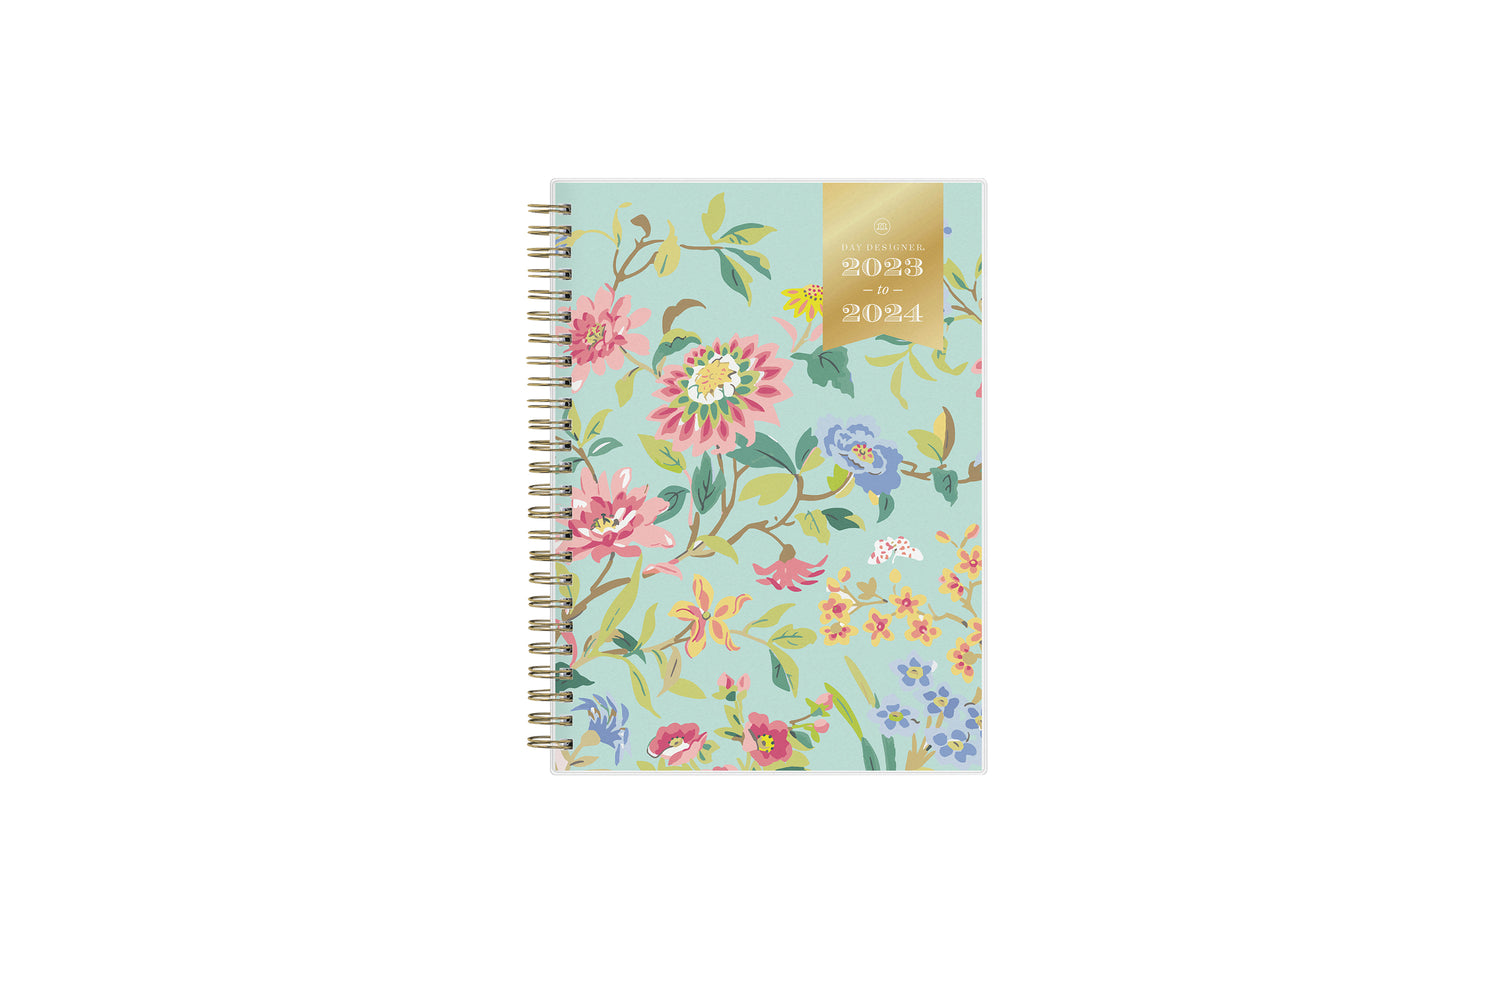 2023-2024 weekly monthly academic planner for the school year in mint background and floral patterns in 5.875x8.625 size, gold wire binding